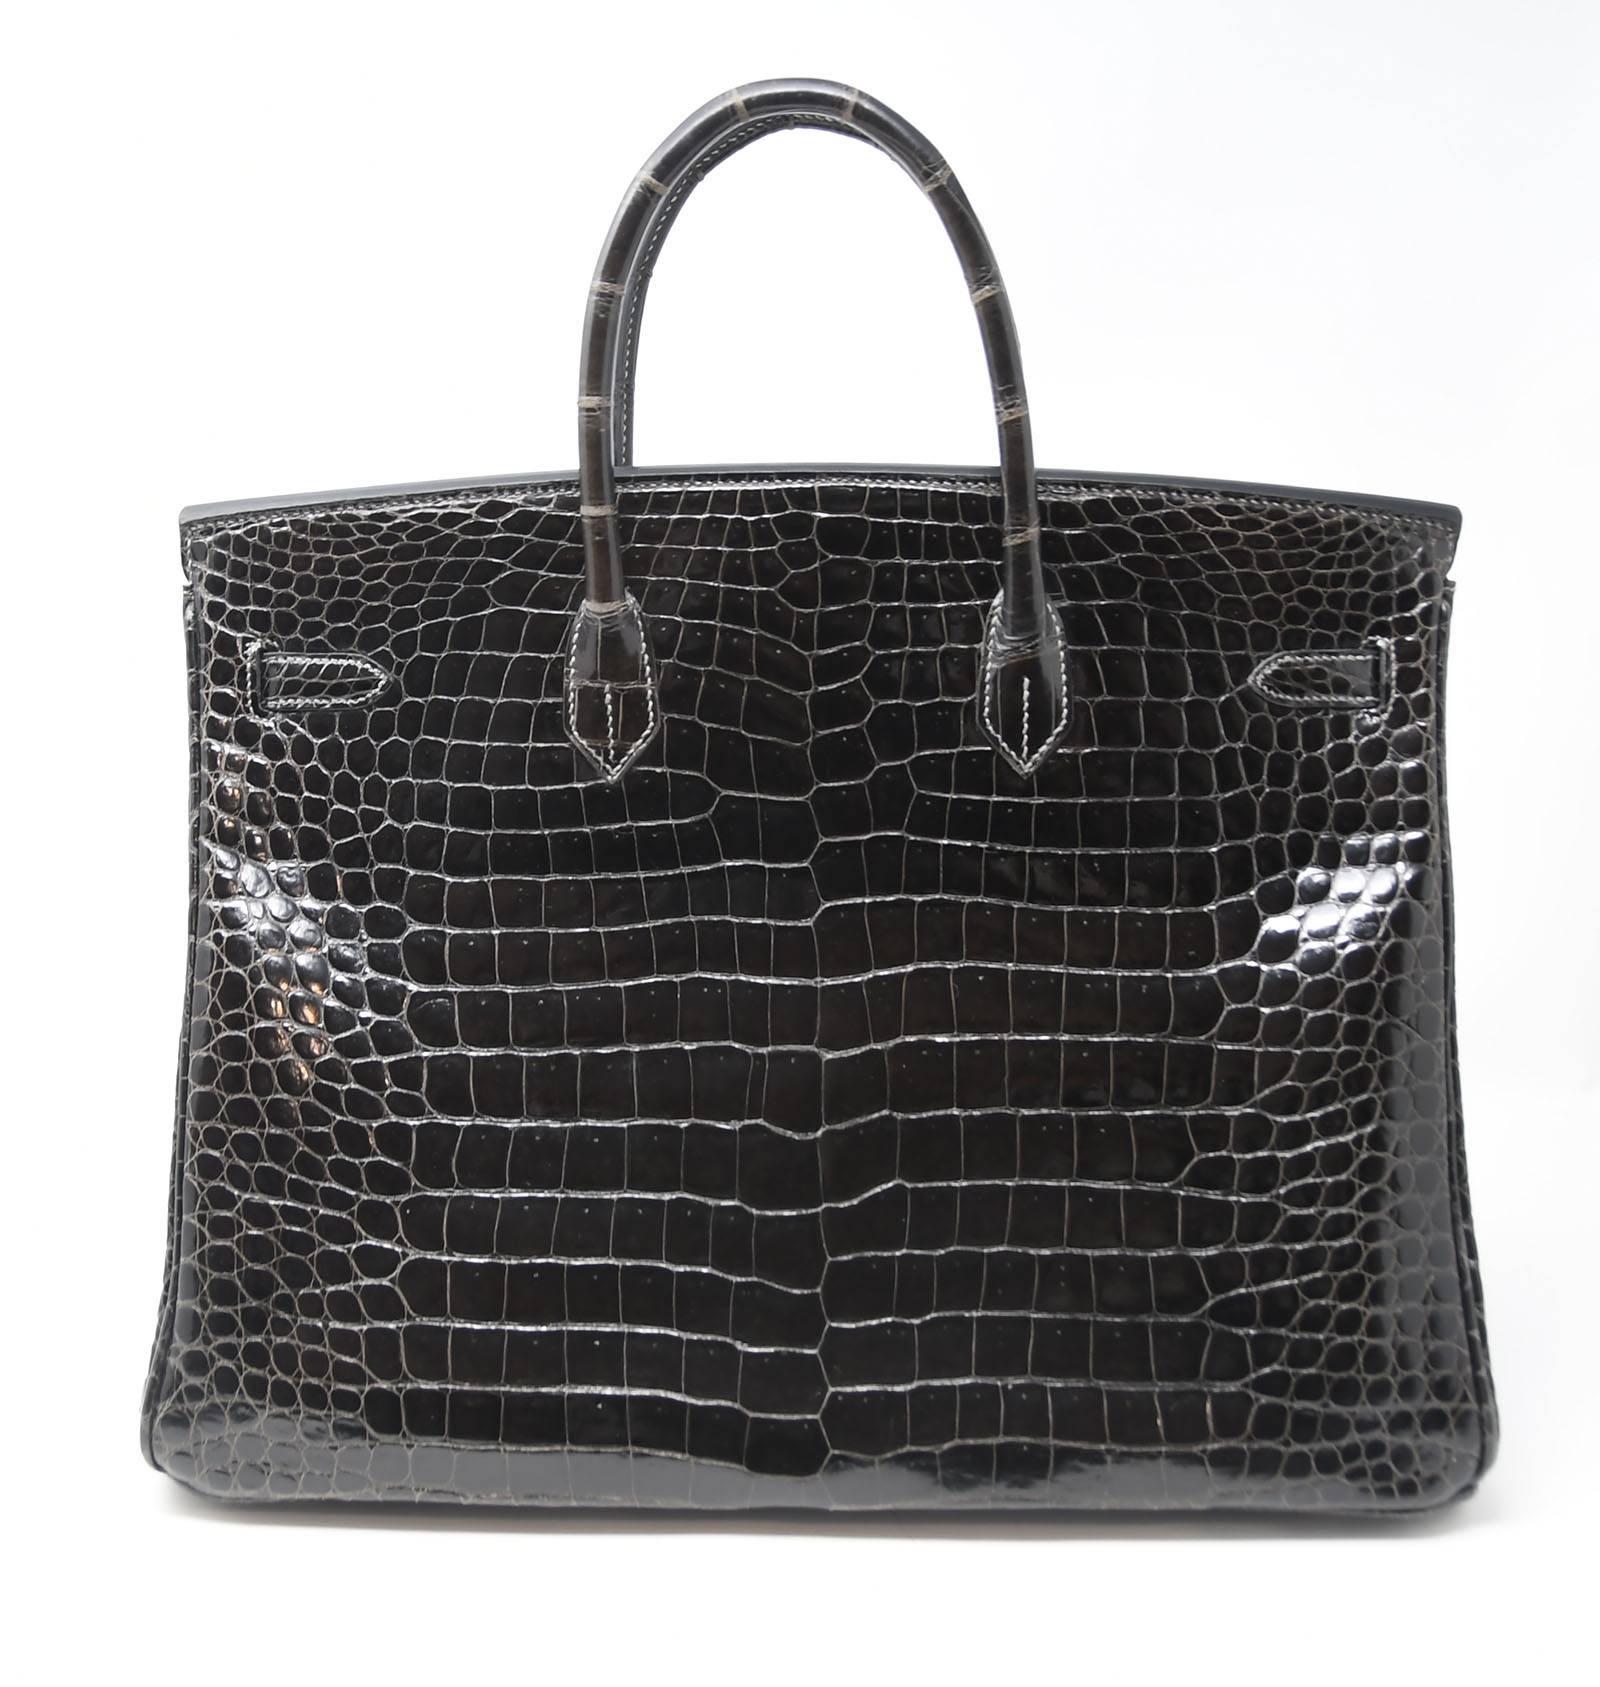 This magnificent Graphite Porosus Crocodile Hermès Birkin 40 has a very sophisticated look. It has palladium hardware, tonal stitching, a front toggle closure, a clochette with lock and two keys, and double rolled handles. Pristine condition with